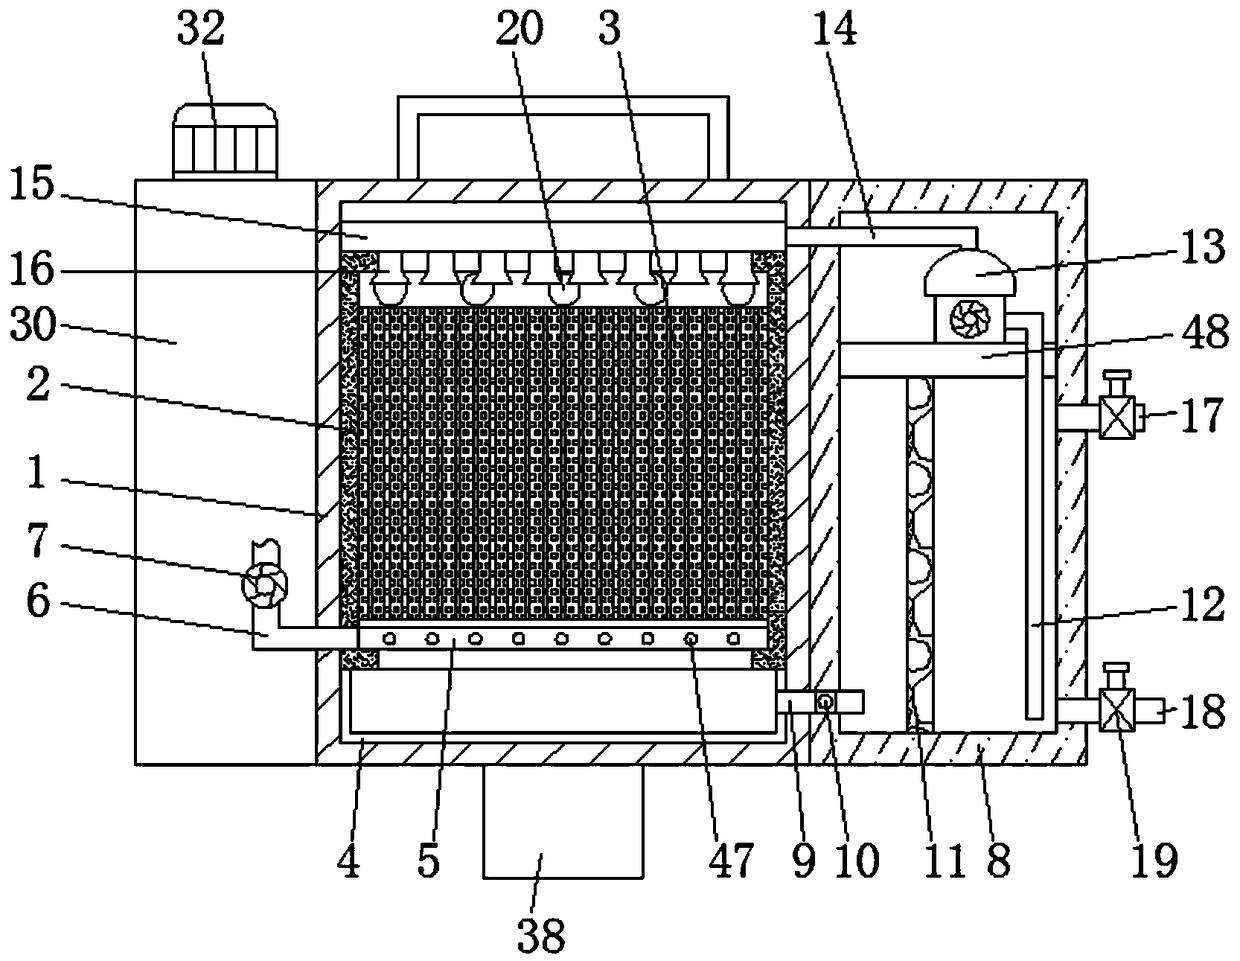 Working method of high-efficiency and environment-friendly air purification dust removing equipment